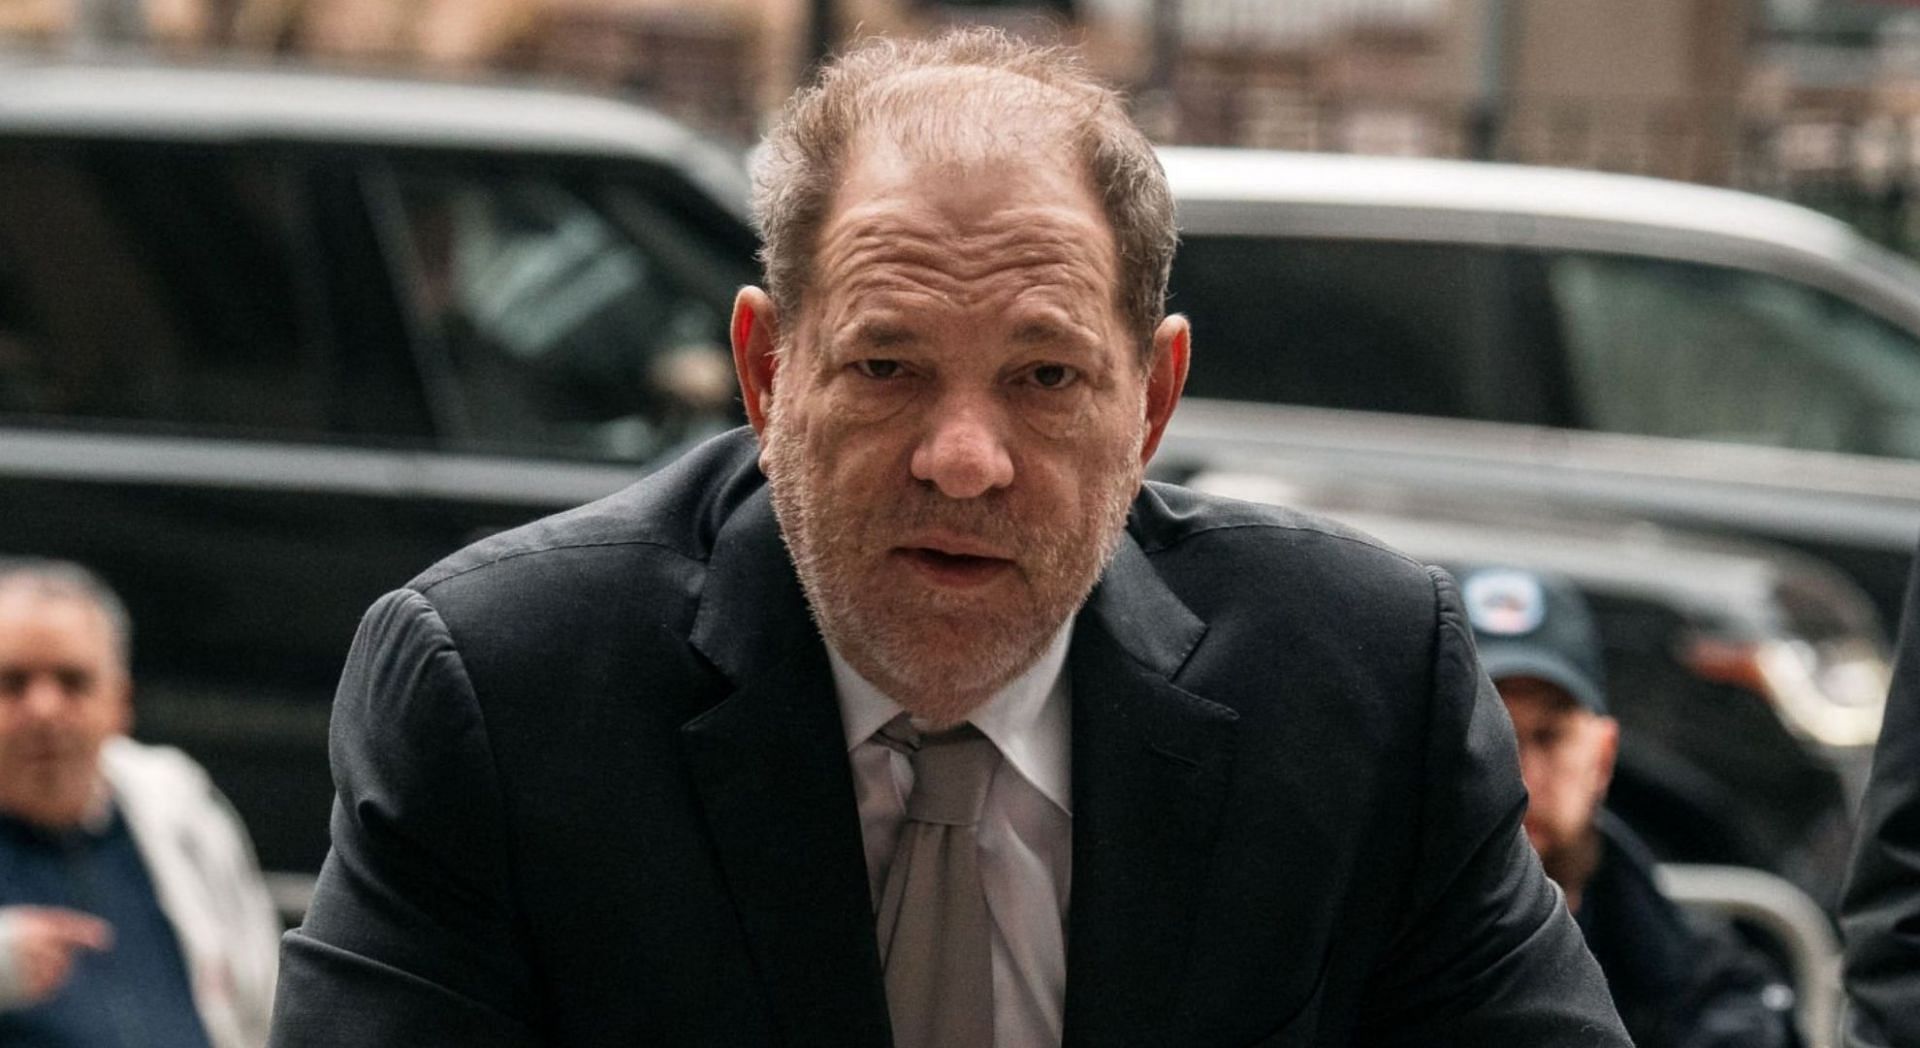 Harvey Weinstein has been convicted of three new counts in a Los Angeles trial (Image via Getty Images)